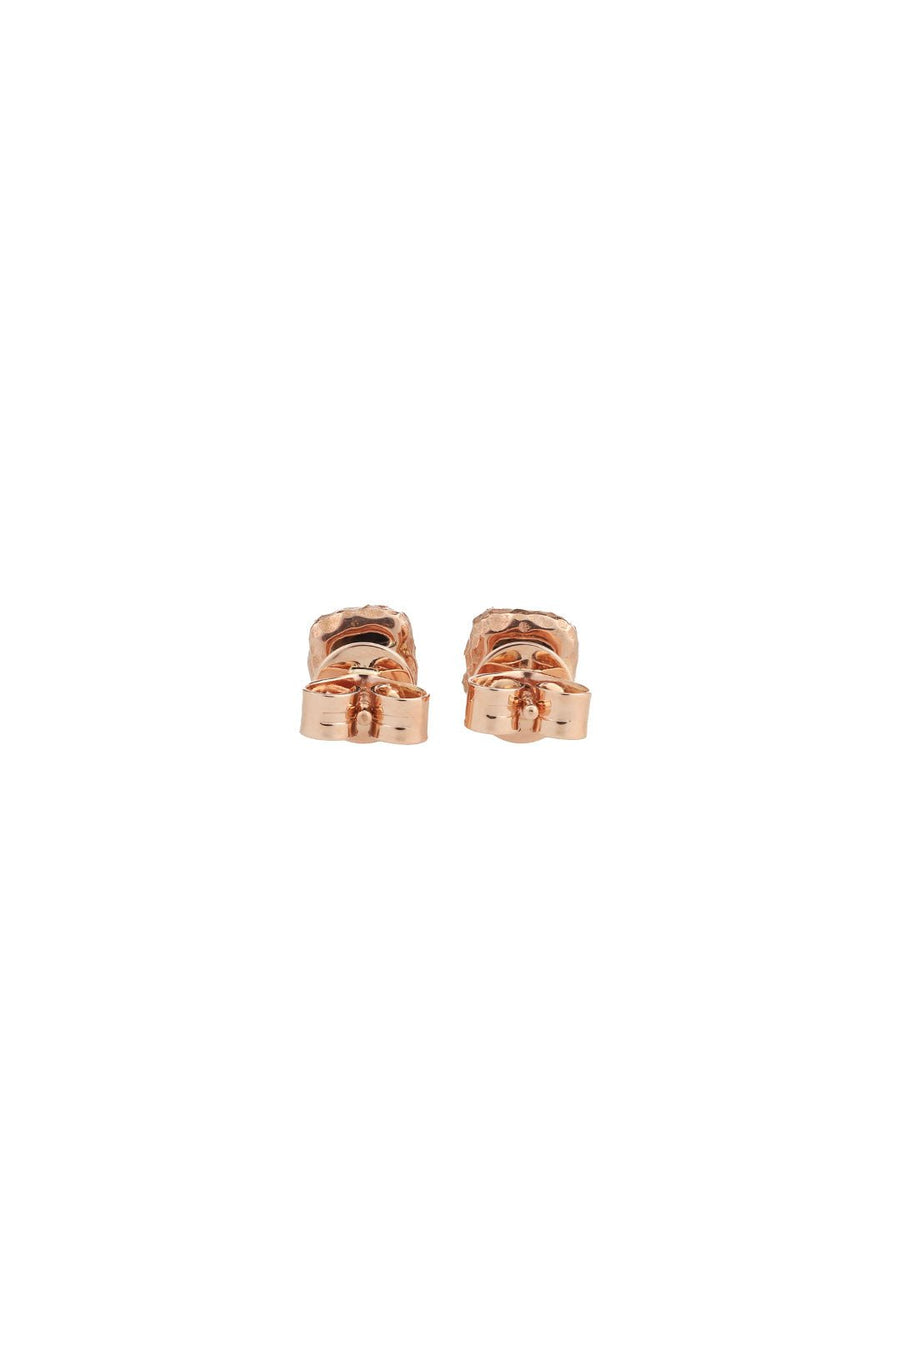 SIA EARRINGS, ROSE GOLD - Burning Torch Online Boutique